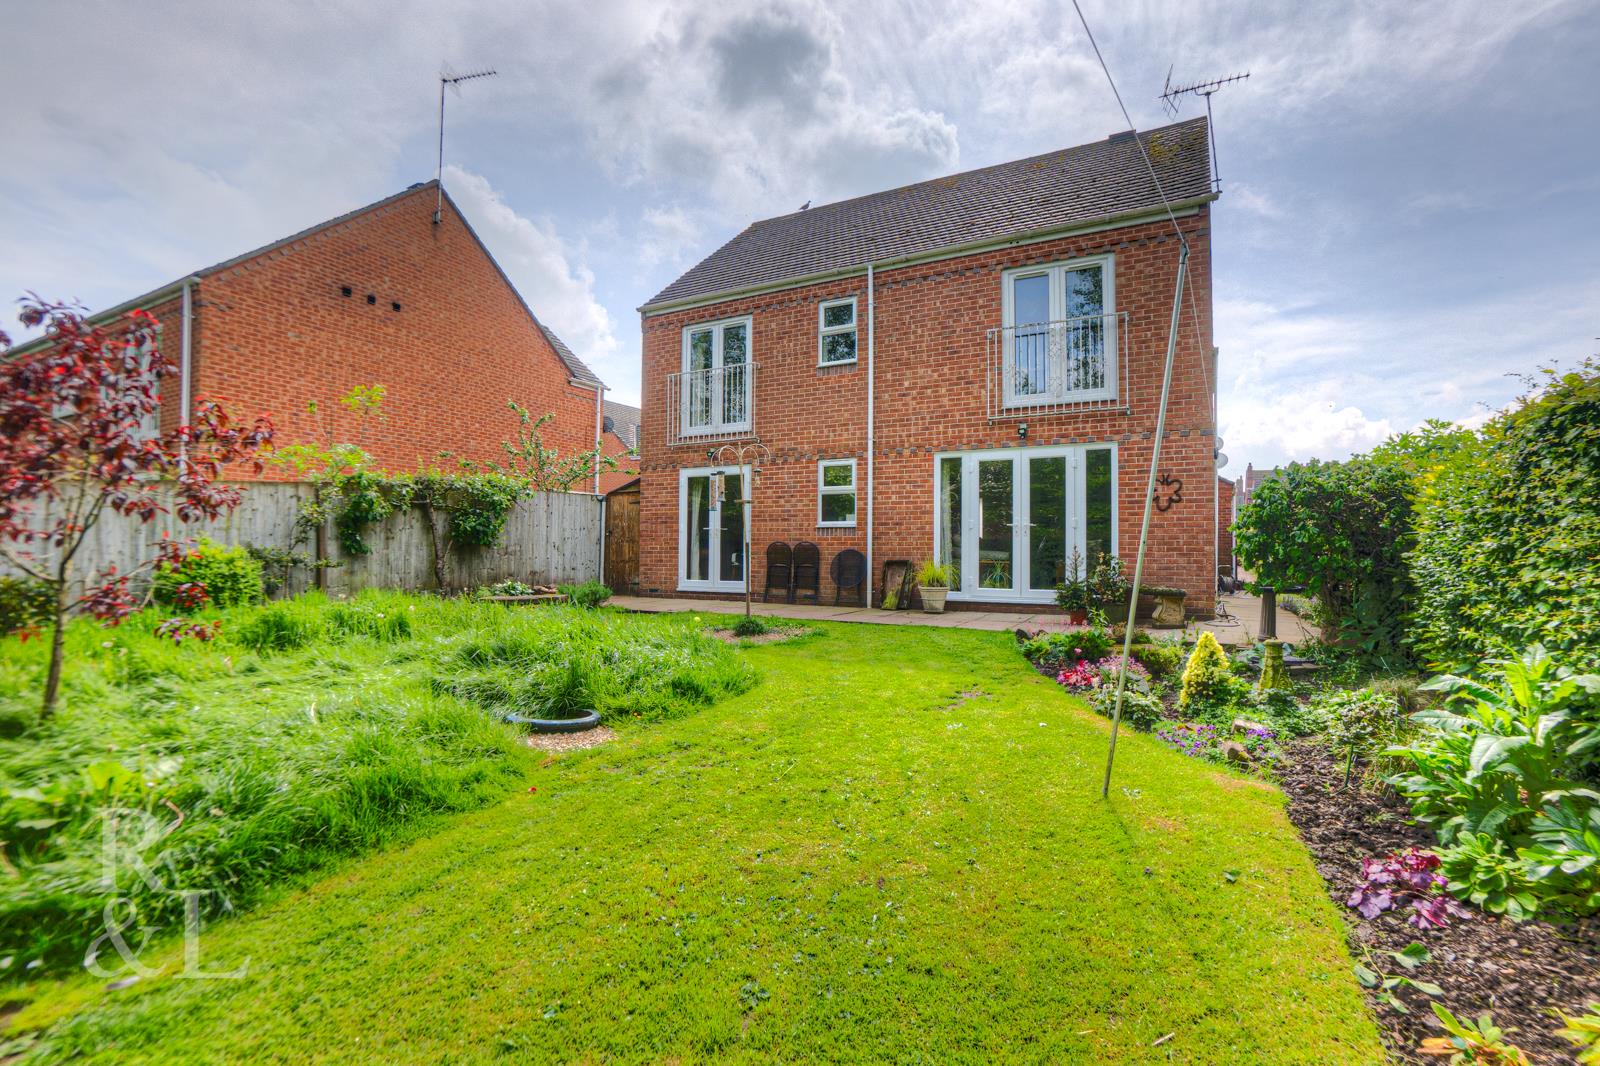 Property image for Rosedene View, Overseal